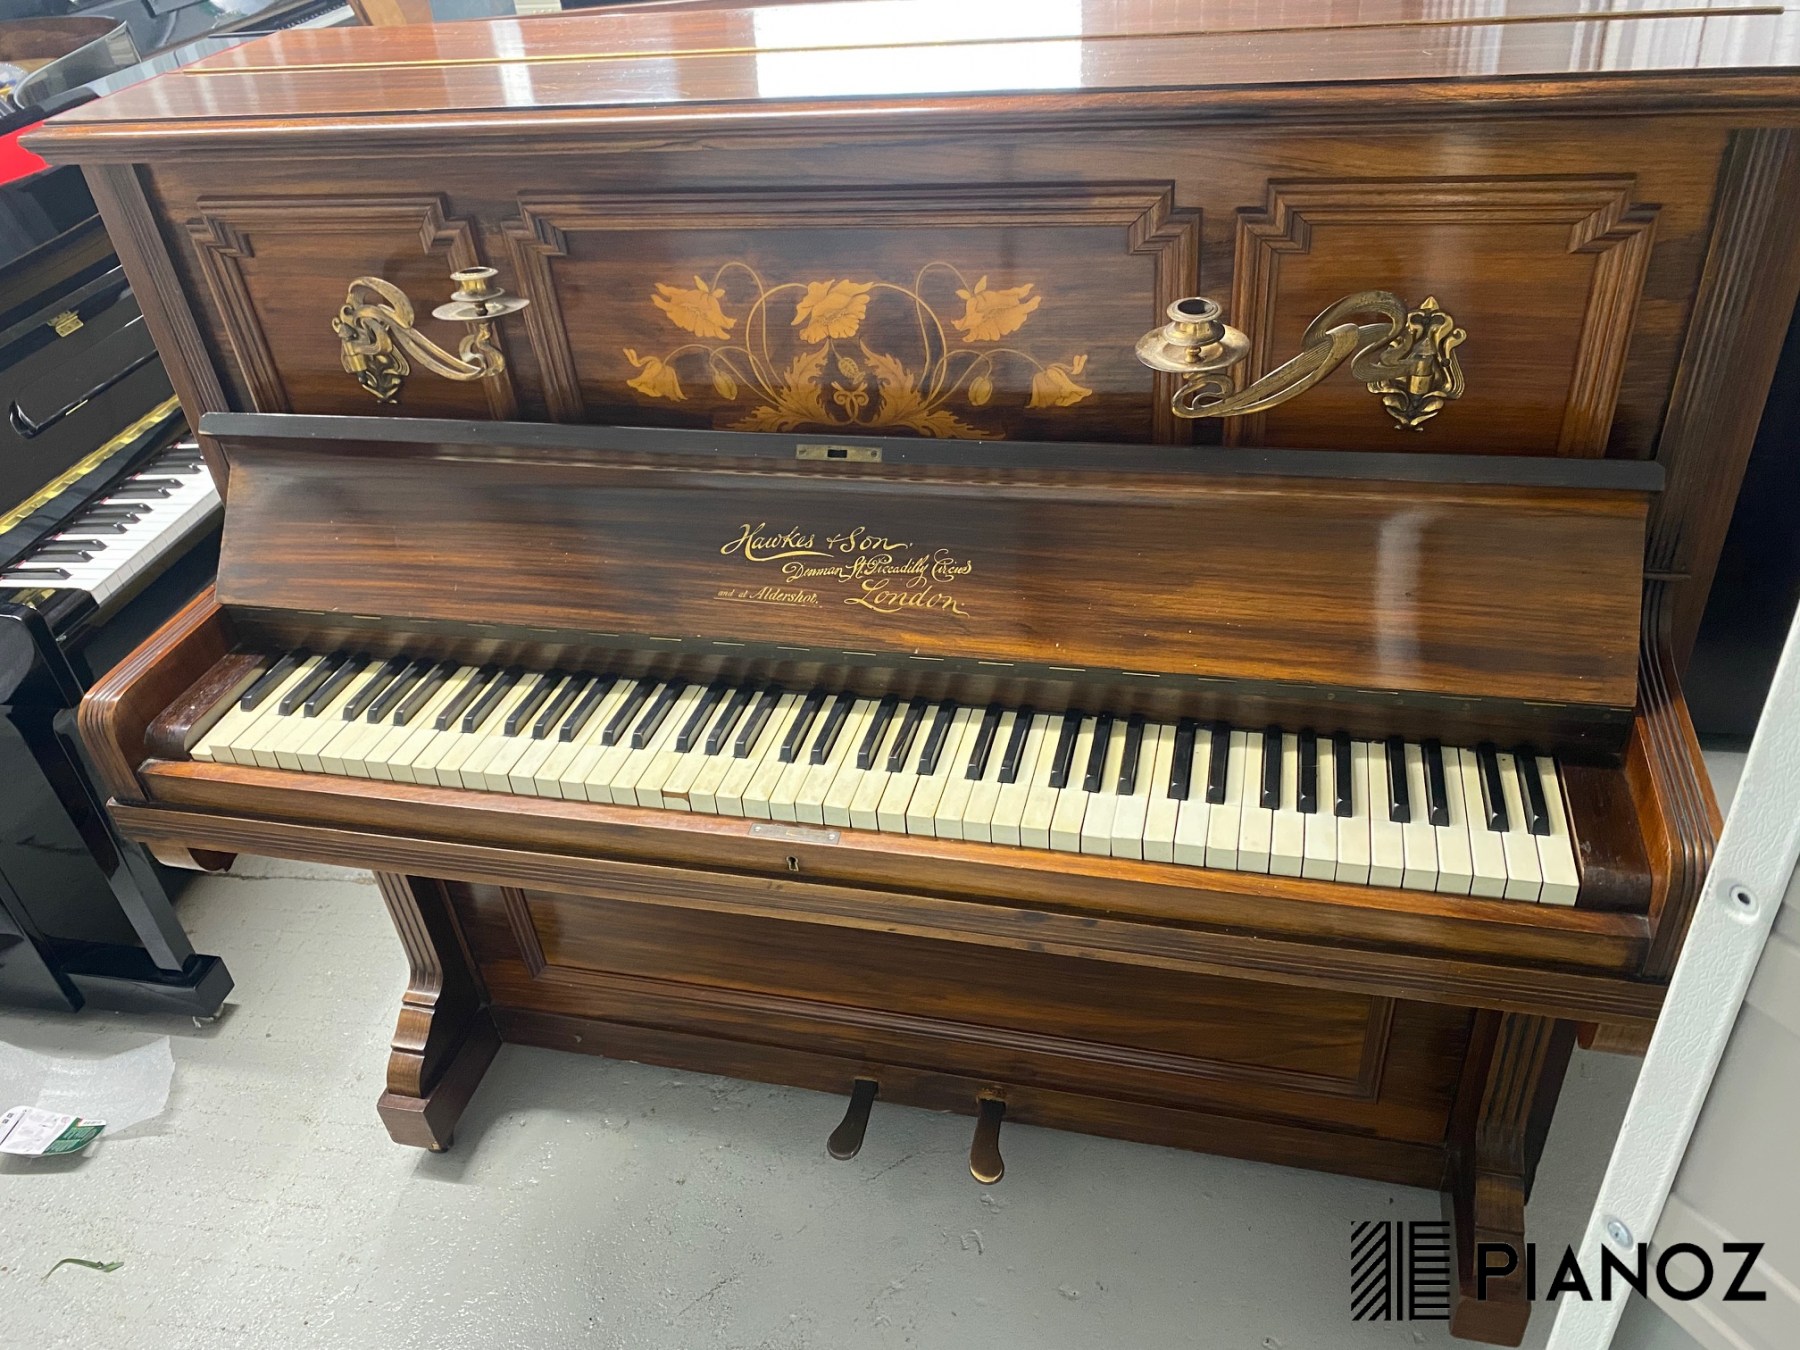 Hawkes ‘Living’ The Rowan Tree Upright Piano piano for sale in UK